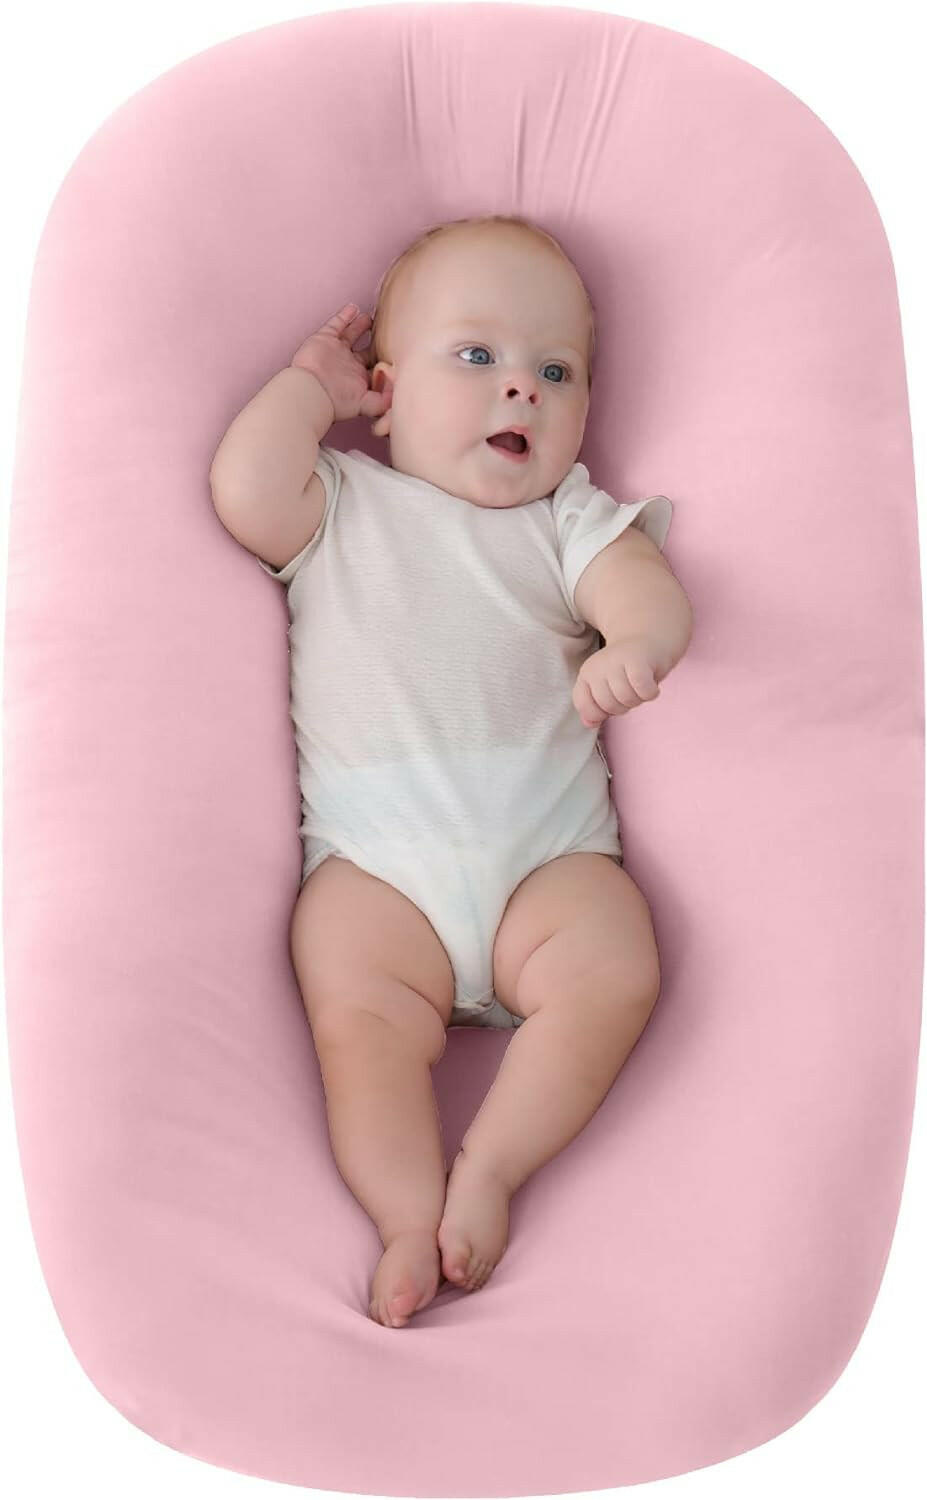 MOON Baby Lounger & Infant Floor Seat, Newborn Essentials Cotton Fabric Baby Nest Ultra Comfortable Infant Napper, Portable and Adjustable Newborn Sleeper, Suitable for 0-9 Months